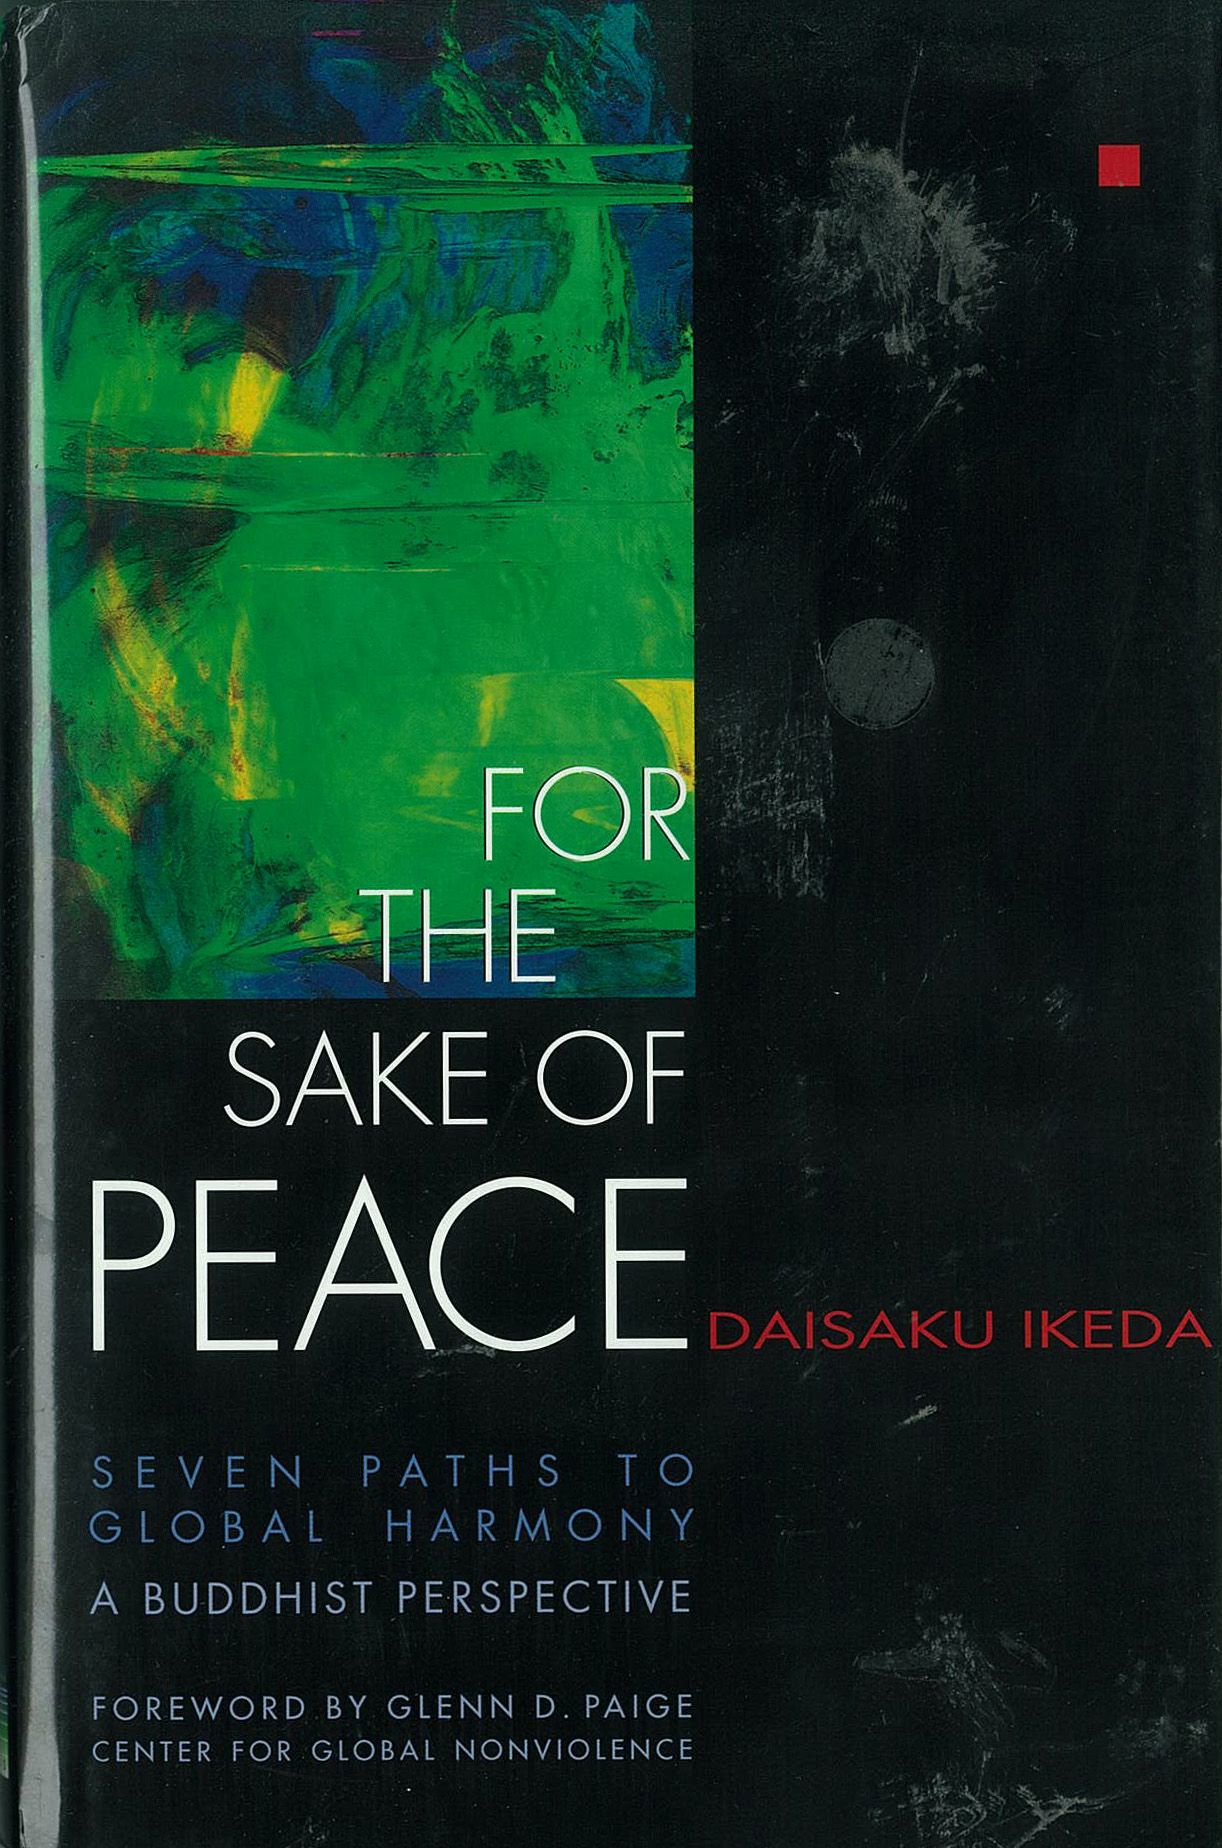 For the Sake of Peace: Seven Paths to Global Harmony